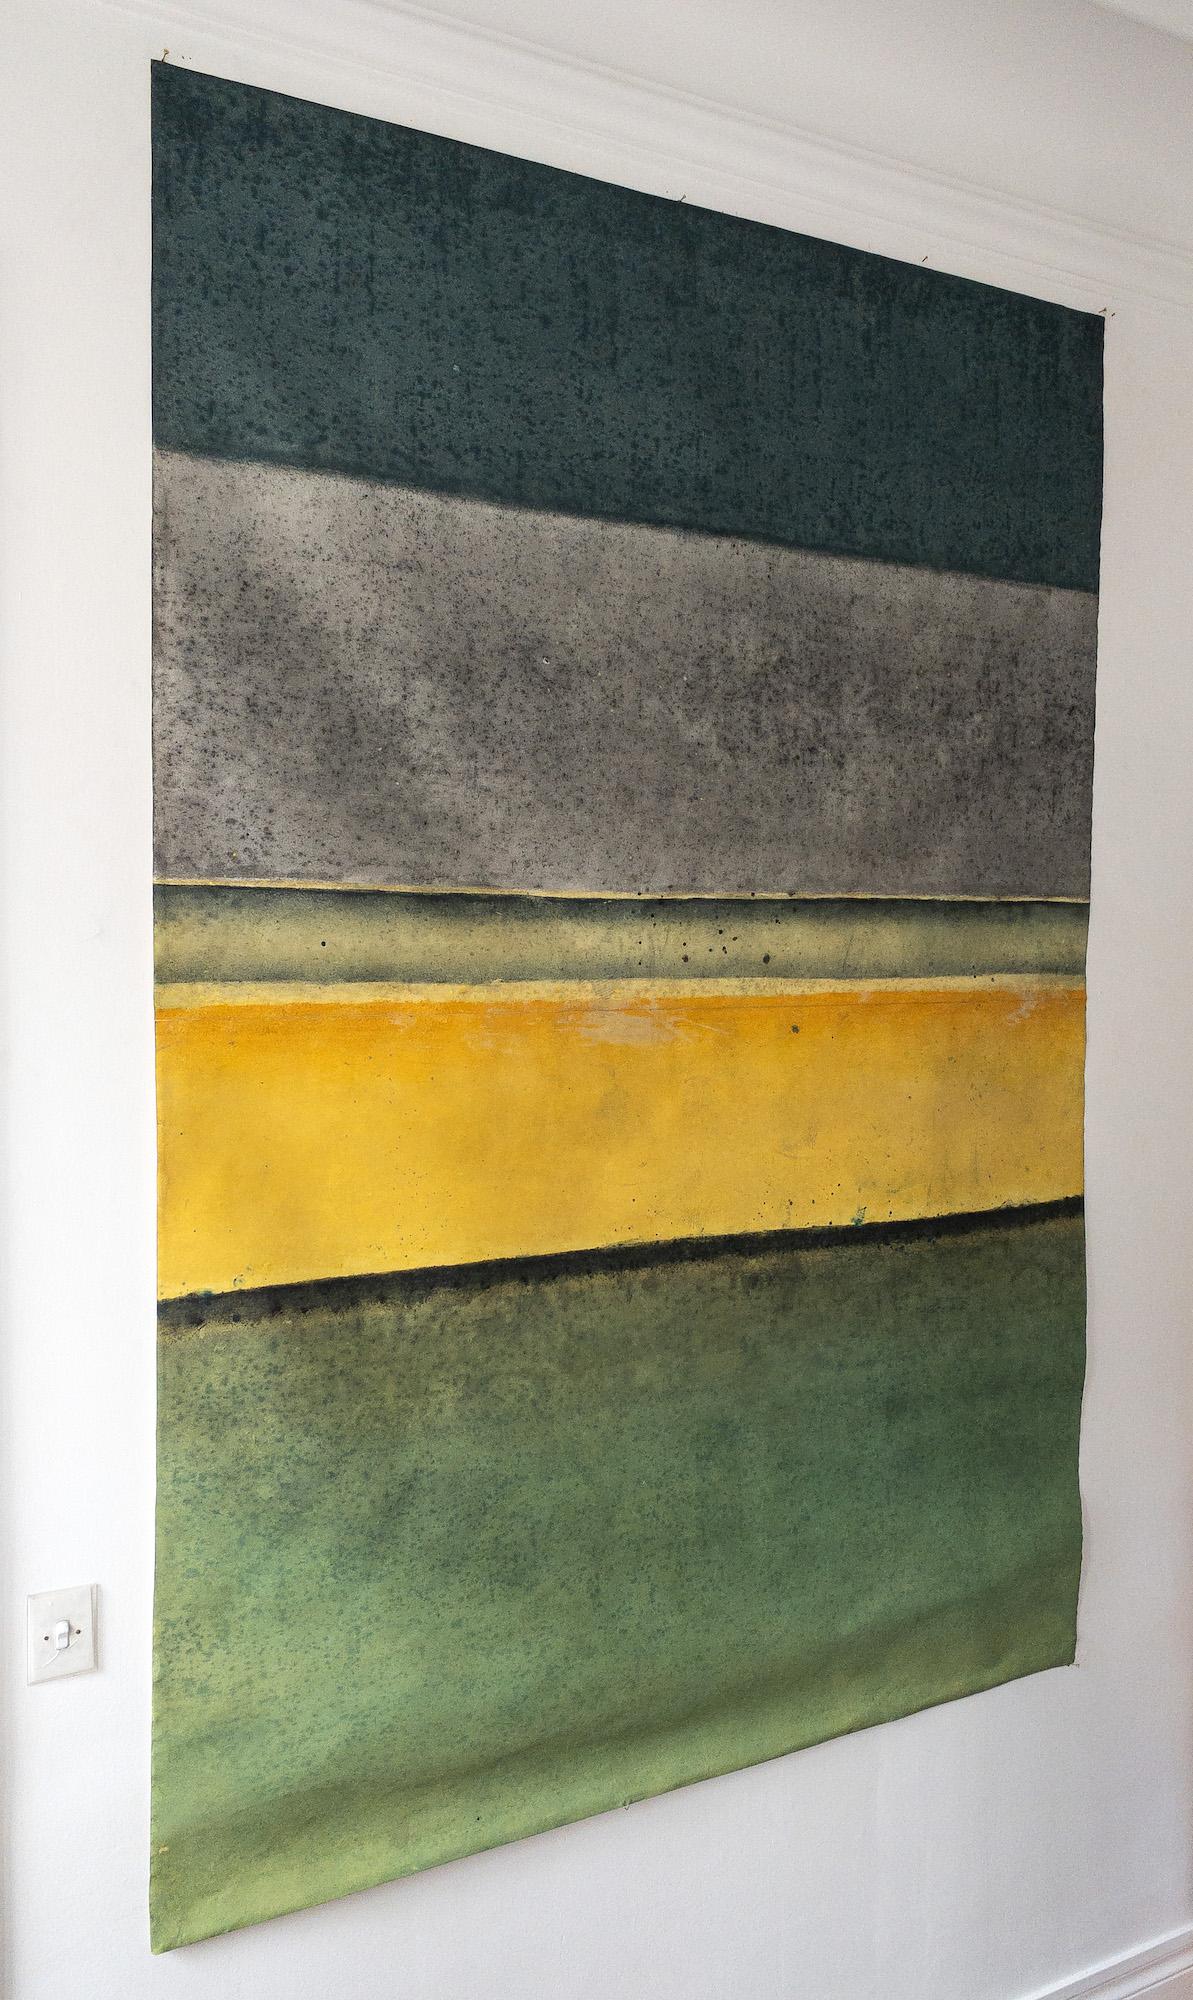 Untitled LXX is a unique oil on free-standing canvas painting by contemporary artist Ferle, dimensions are 200 cm × 140 cm (78.7 × 55.1 in).
The artwork is signed, sold unframed and comes with a certificate of authenticity.

A viewer would first